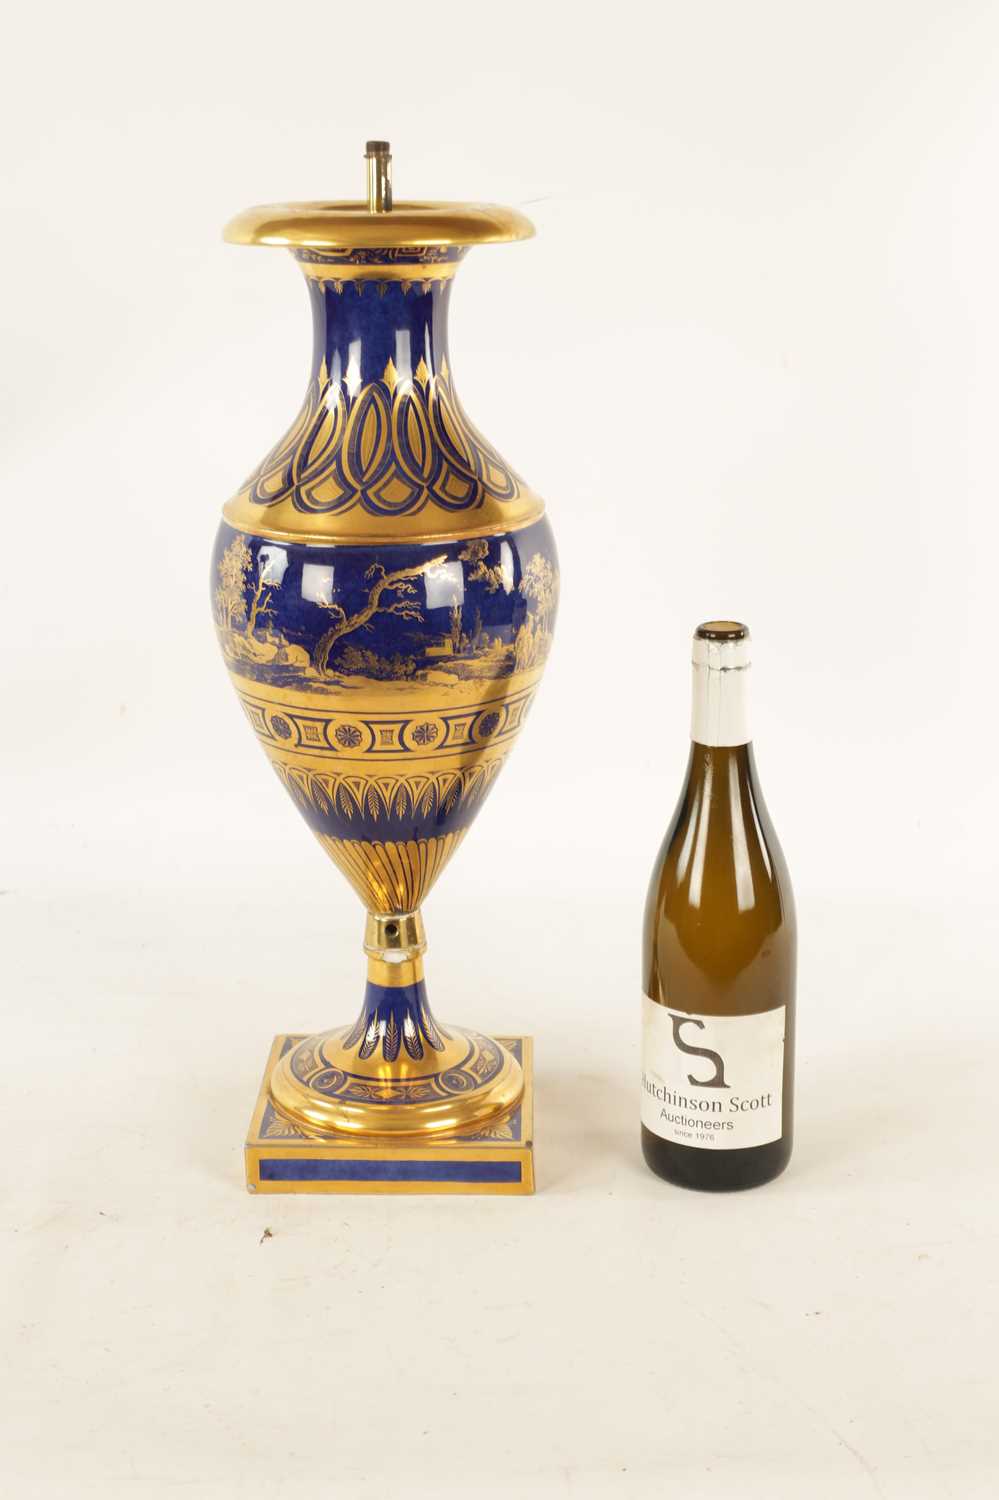 AN EARLY 19TH CENTURY FRENCH PARIS PORCELAIN ROYAL BLUE AND GILT URN SHAPED PEDESTAL VASE - Image 2 of 8